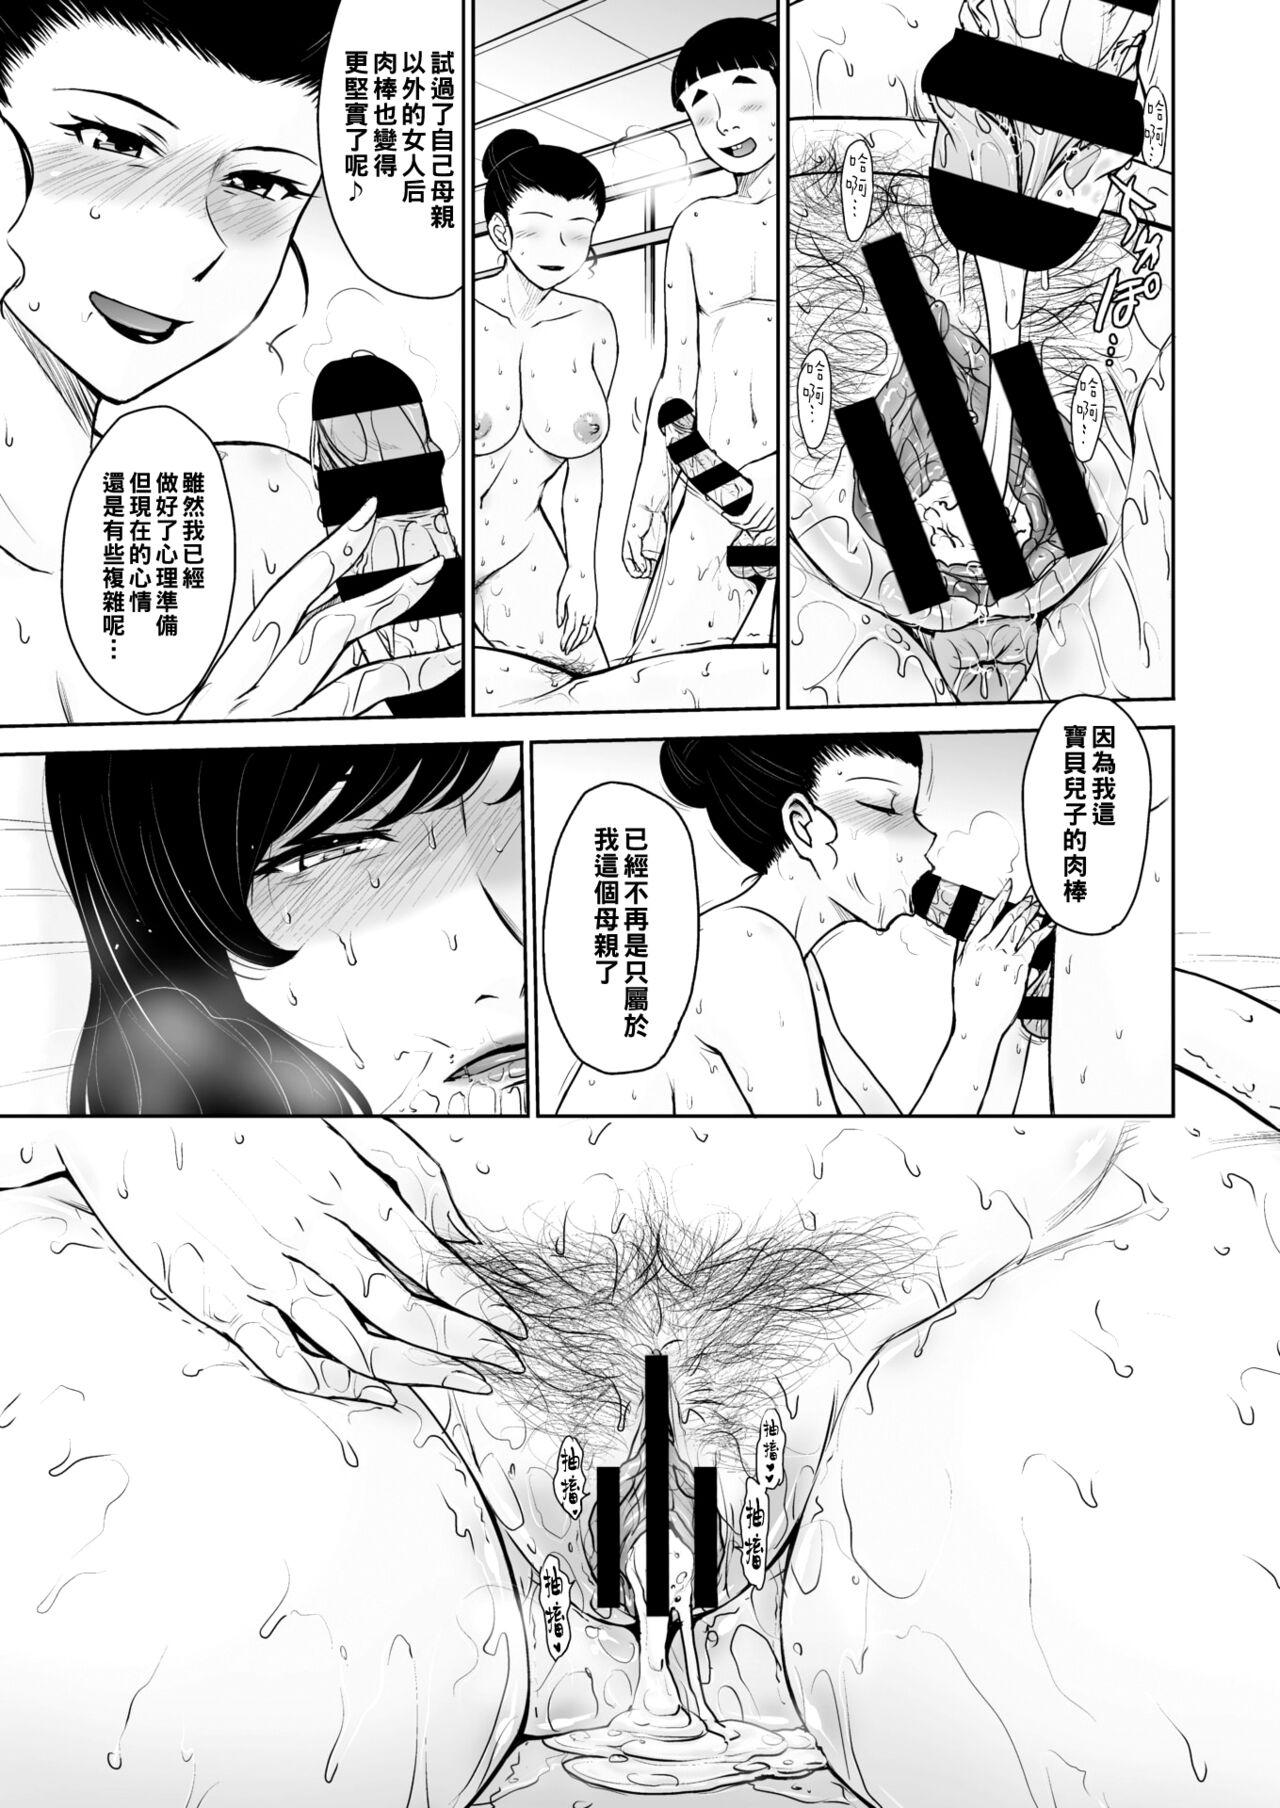 Cut 因習の虜2（Chinese） Messy - Picture 3